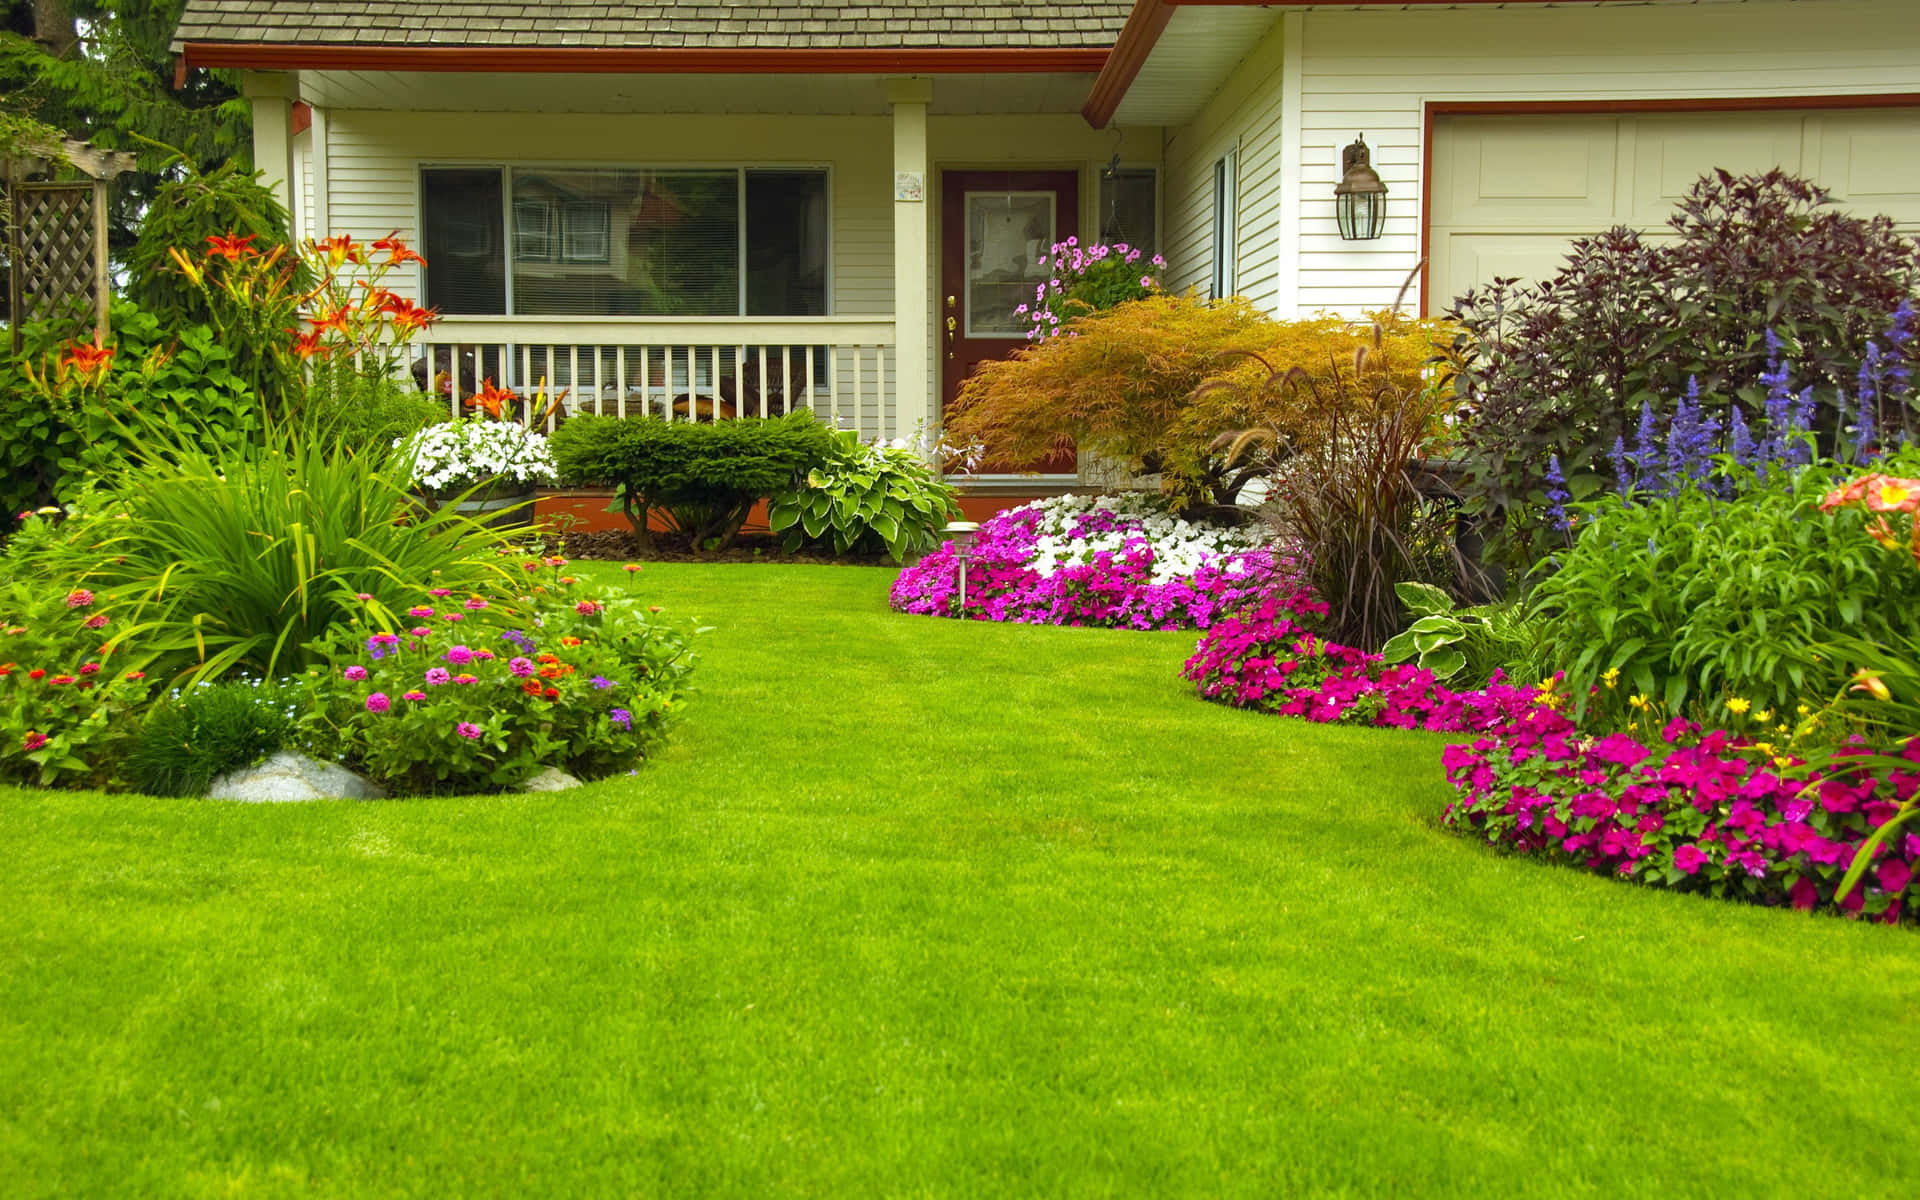 Landscaping Bermuda Grass Picture